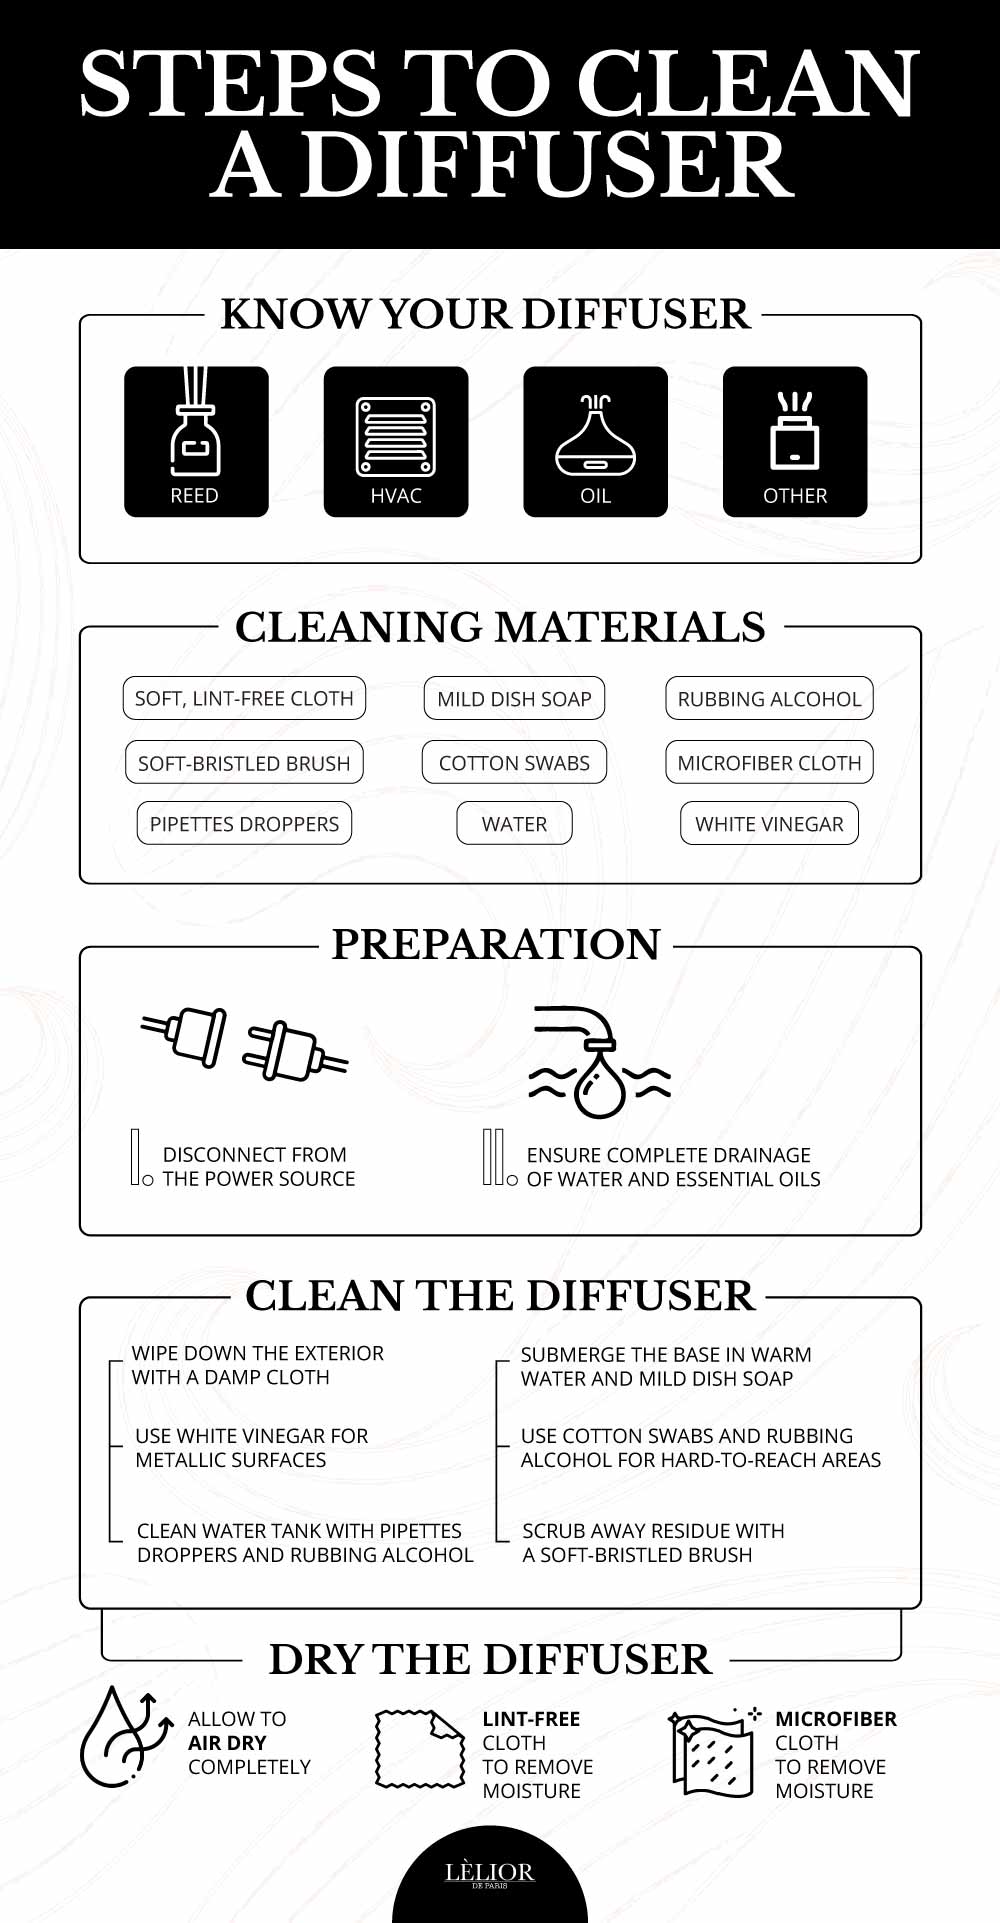 Steps to Clean a Diffuser